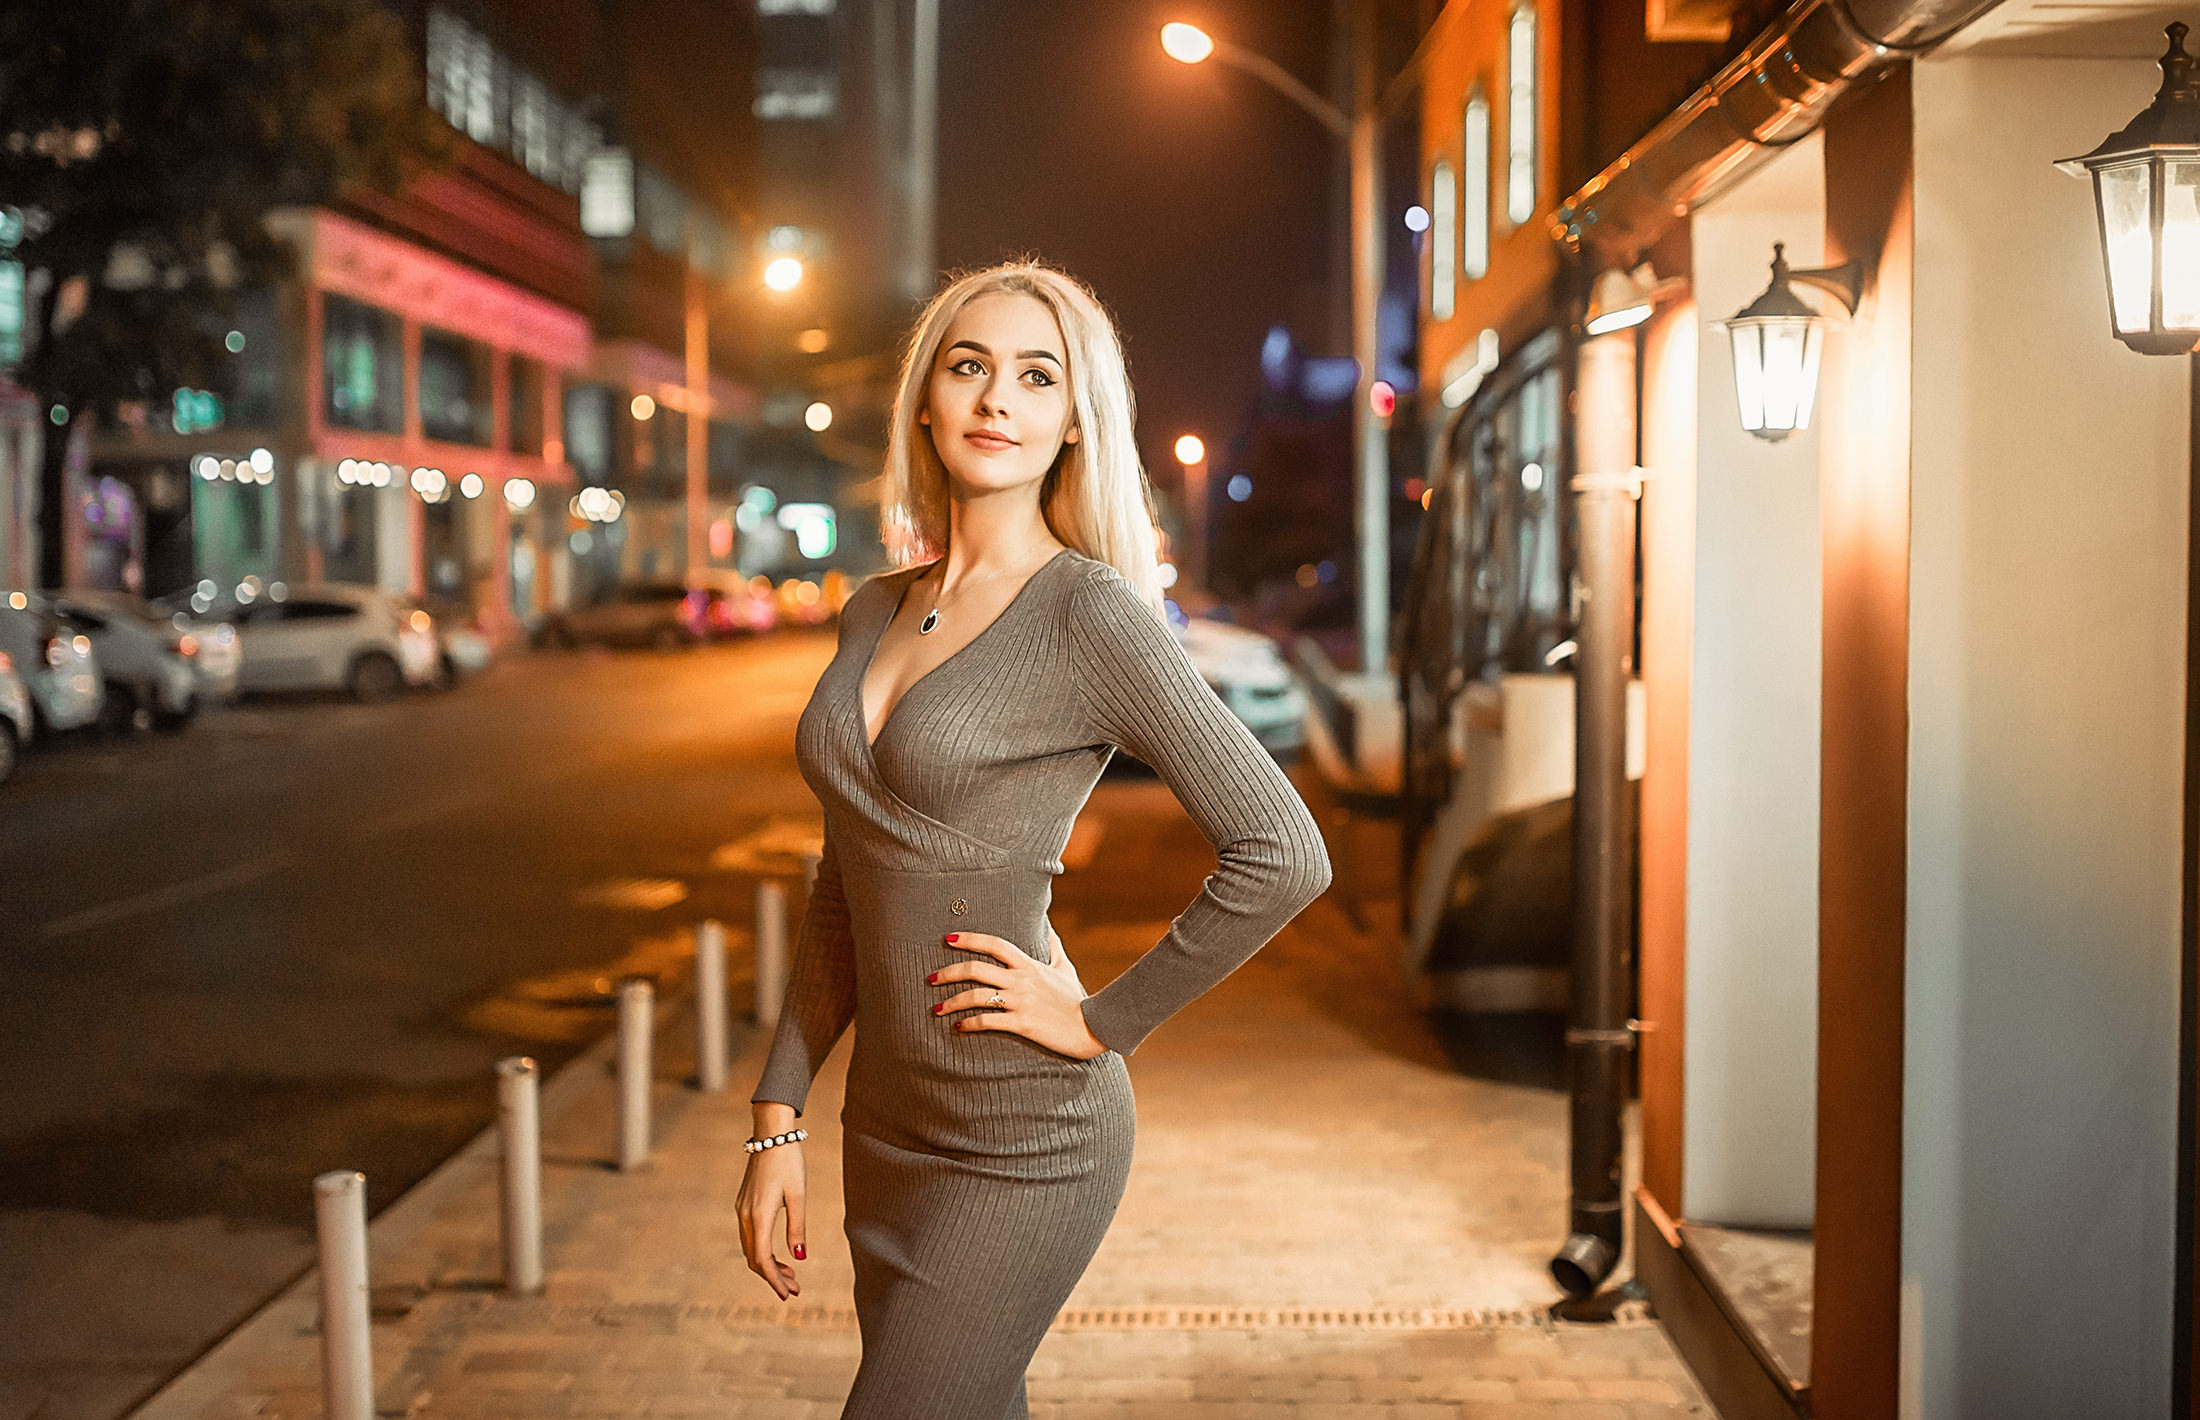 People 2200x1420 women portrait tight dress blonde women outdoors necklace cleavage red nails depth of field smiling looking away